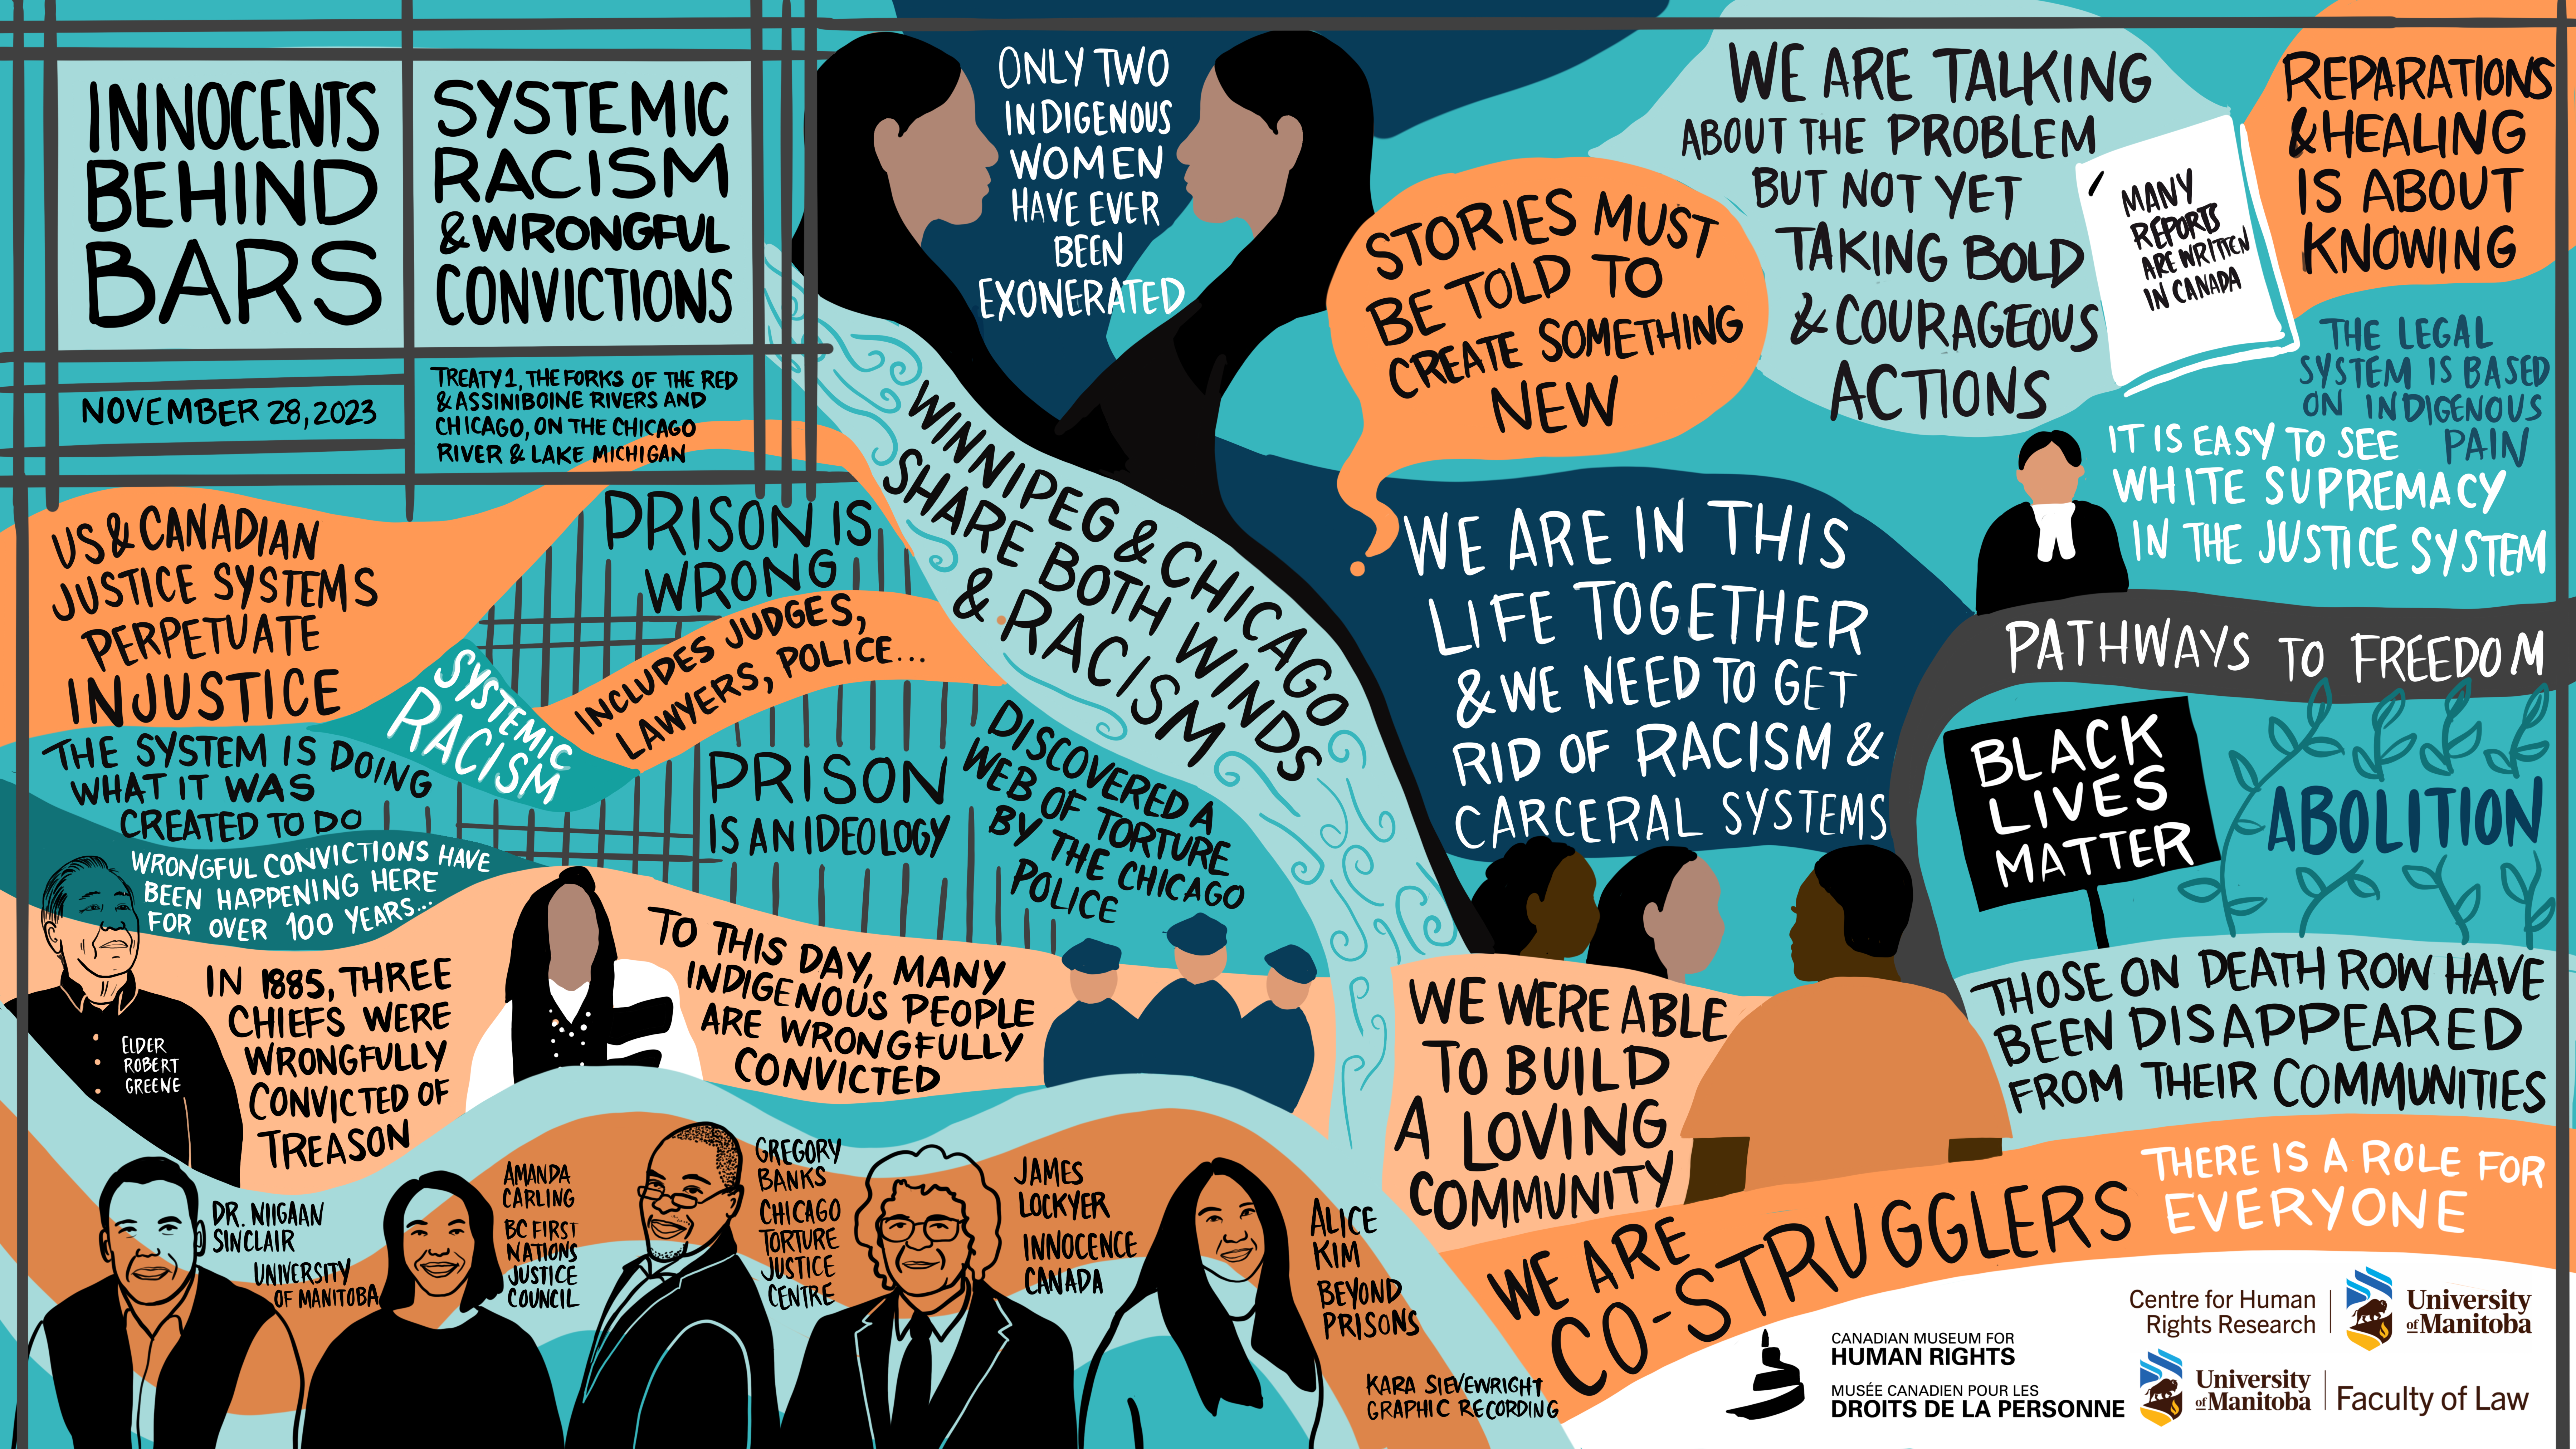 This large image (primarily in blues and orange) features text and graphics capturing a panel event “Innocents Behind Bars: Systemic Racism and Wrongful Convictions” from November 2023. There are prison bars and the flow of rivers (found in both Winnipeg and Chicago) and the beginning of vegetation. There are images of the speakers, including the Elder who opened the event and the facilitator. The and text on the image (some of which are quotes and others paraphrases) highlighting how the justice systems perpetuate injustice and systemic racism, and encourages the audience to challenge these systems of oppression.